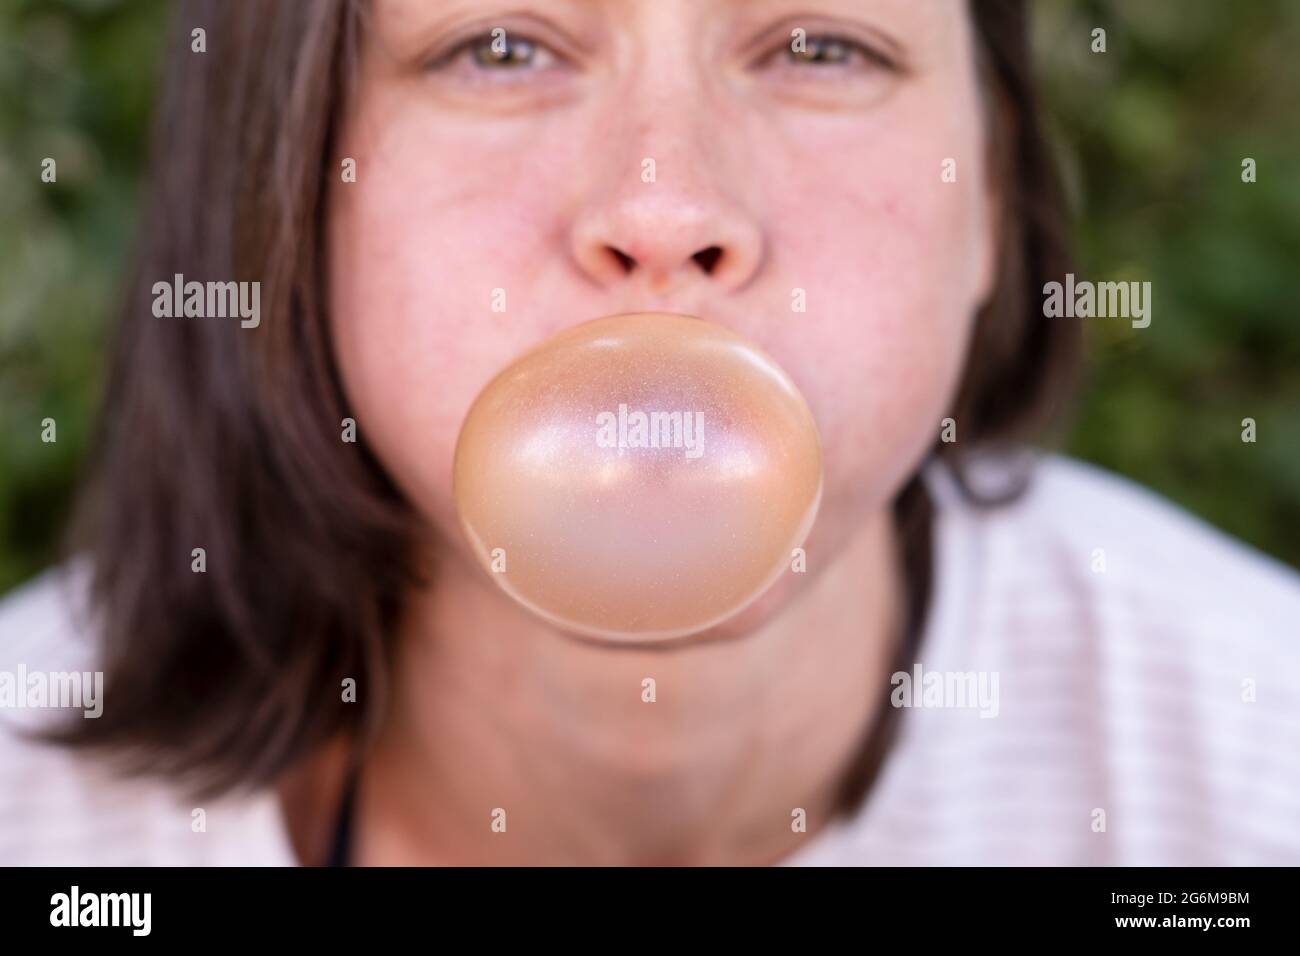 Closeup portrait of funny women, carefully inflates bubble gum, with narrowed eyes and round cheeks, outdoors.  Stock Photo